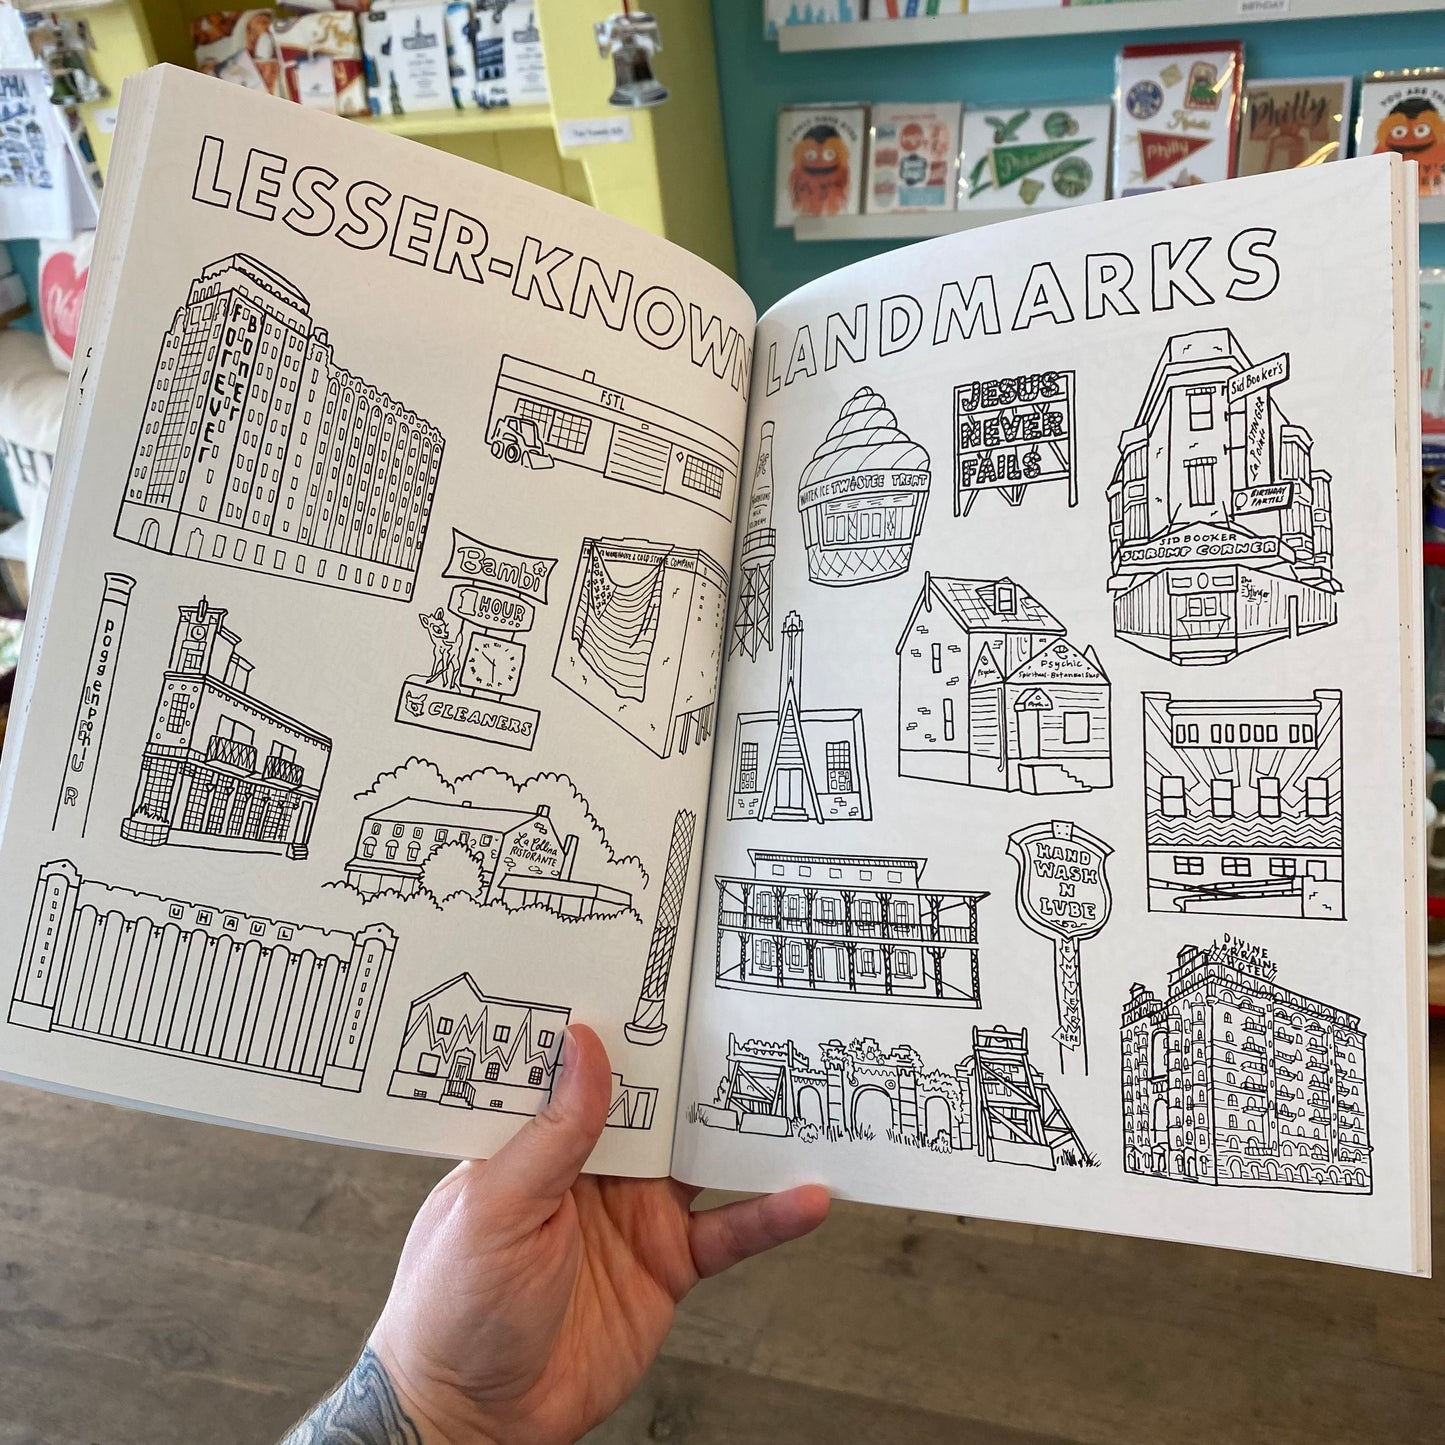 A person holding open a Drawn Jawn Coloring Book titled "lesser-known landmarks" featuring original drawings of various architectural structures by Kate Otte.